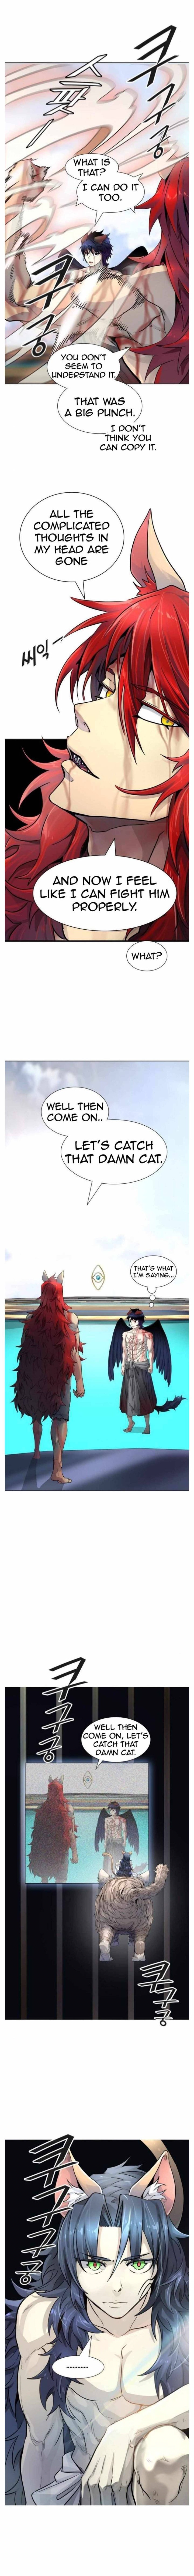 Tower Of God Chapter 503 Page 24